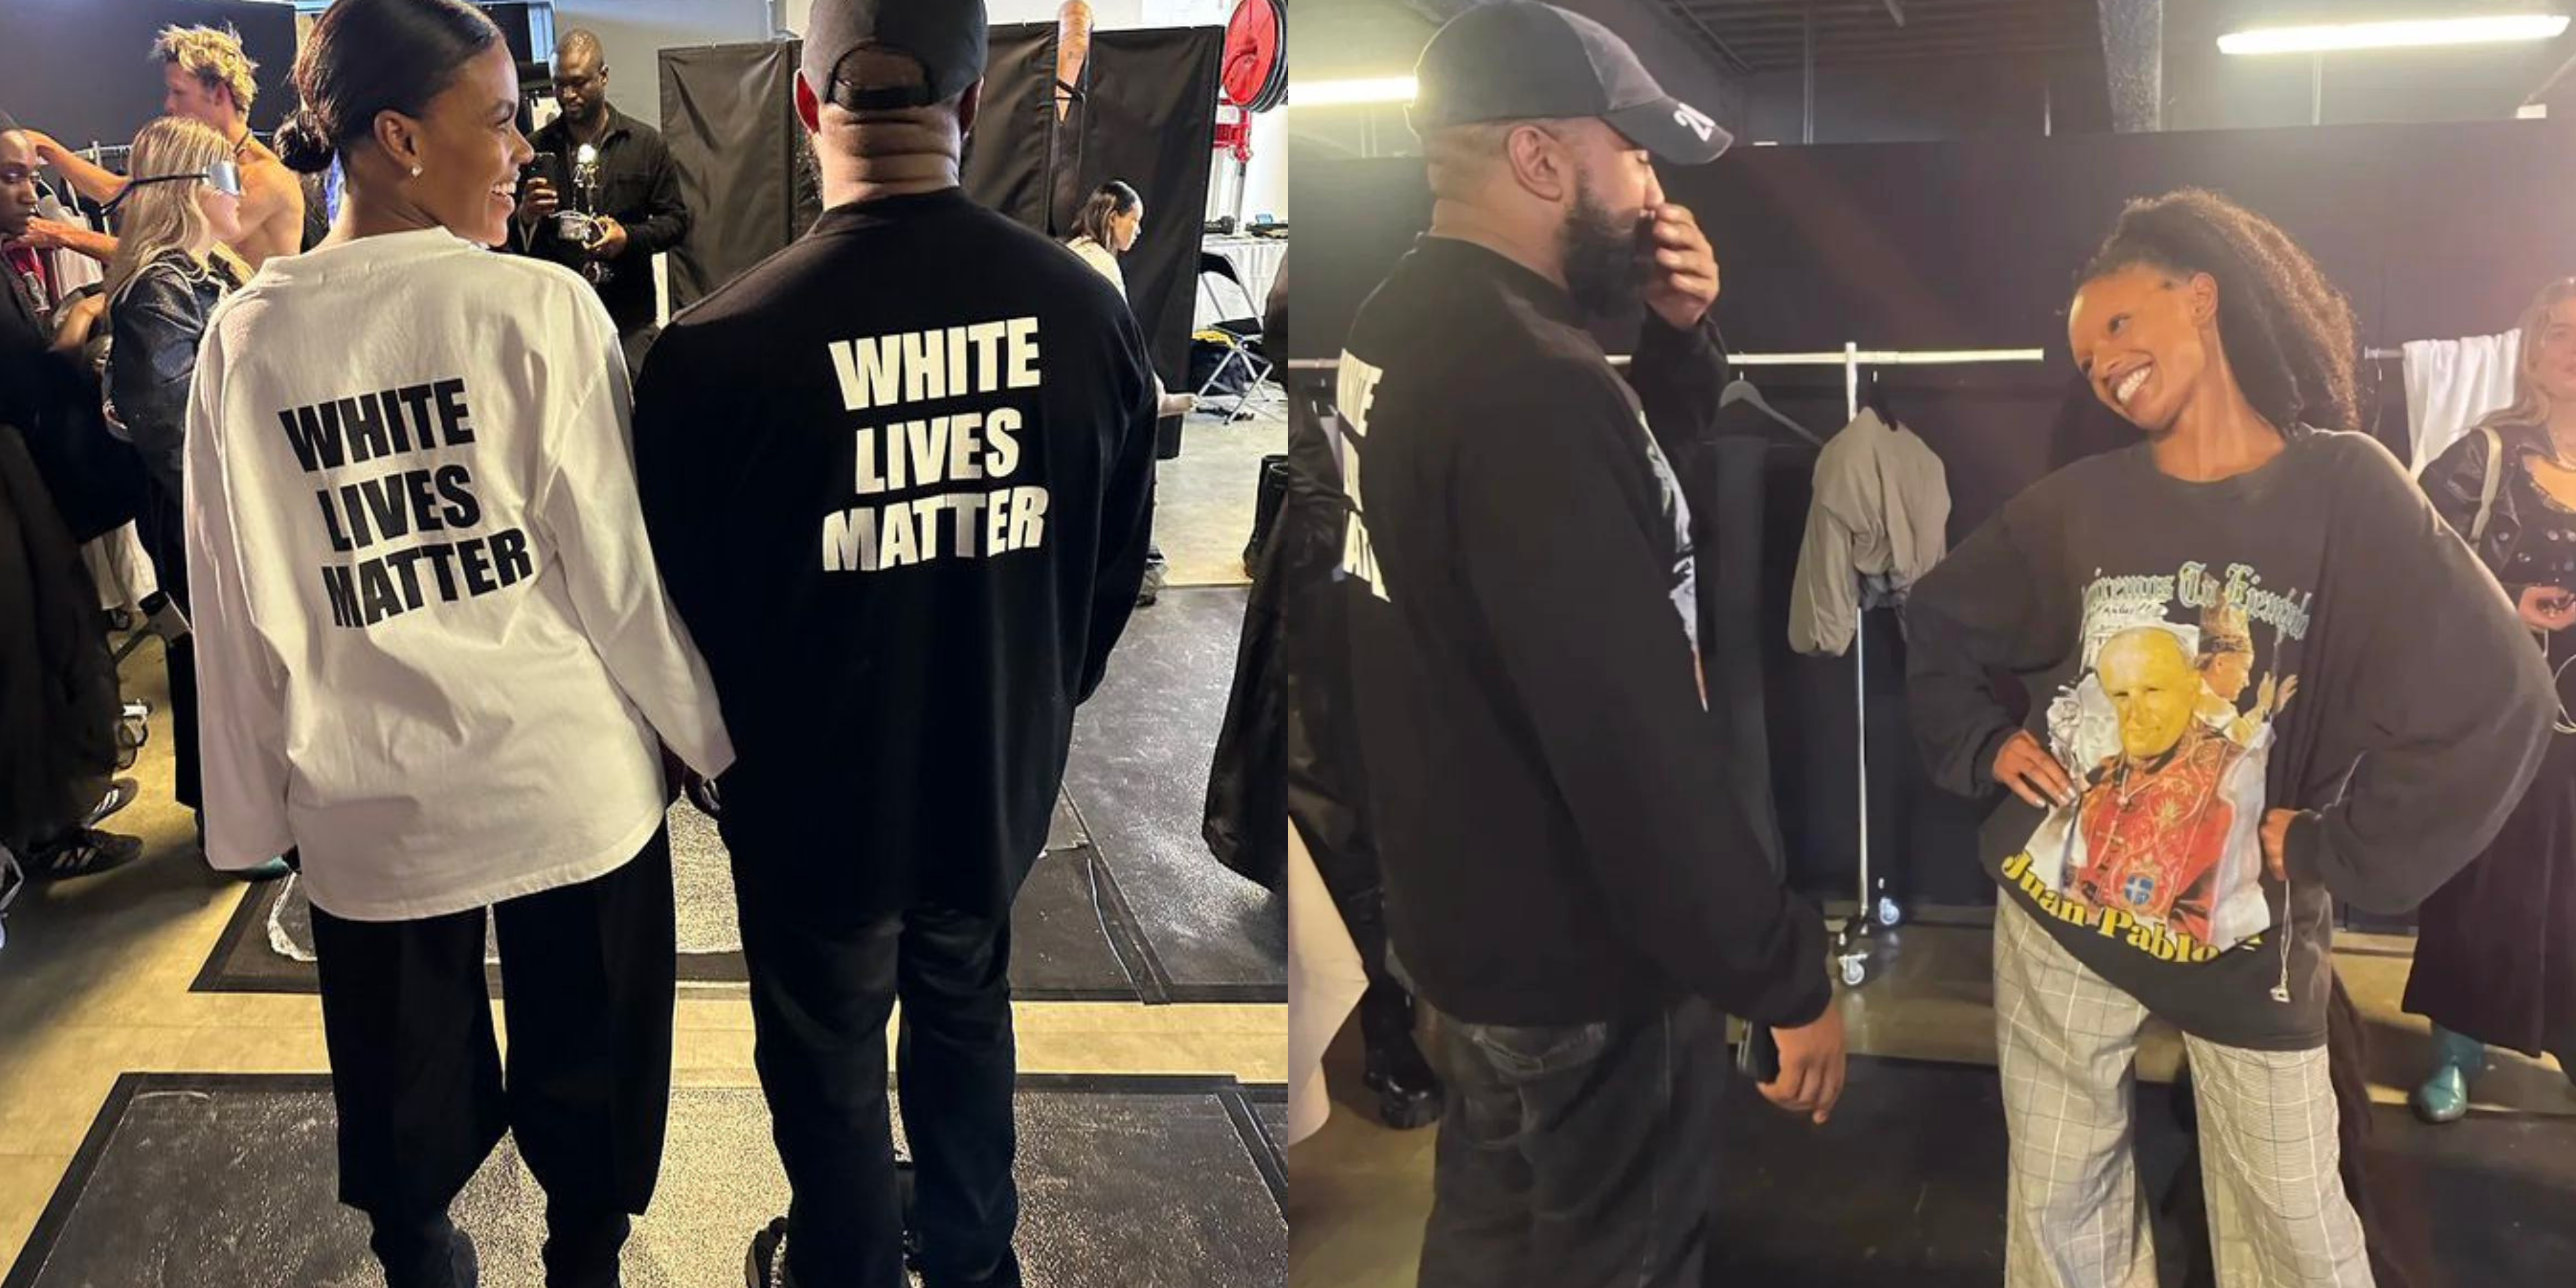 “White Lives Matter” Is A Loaded Slogan – Here’s What It Means And Where It Comes From